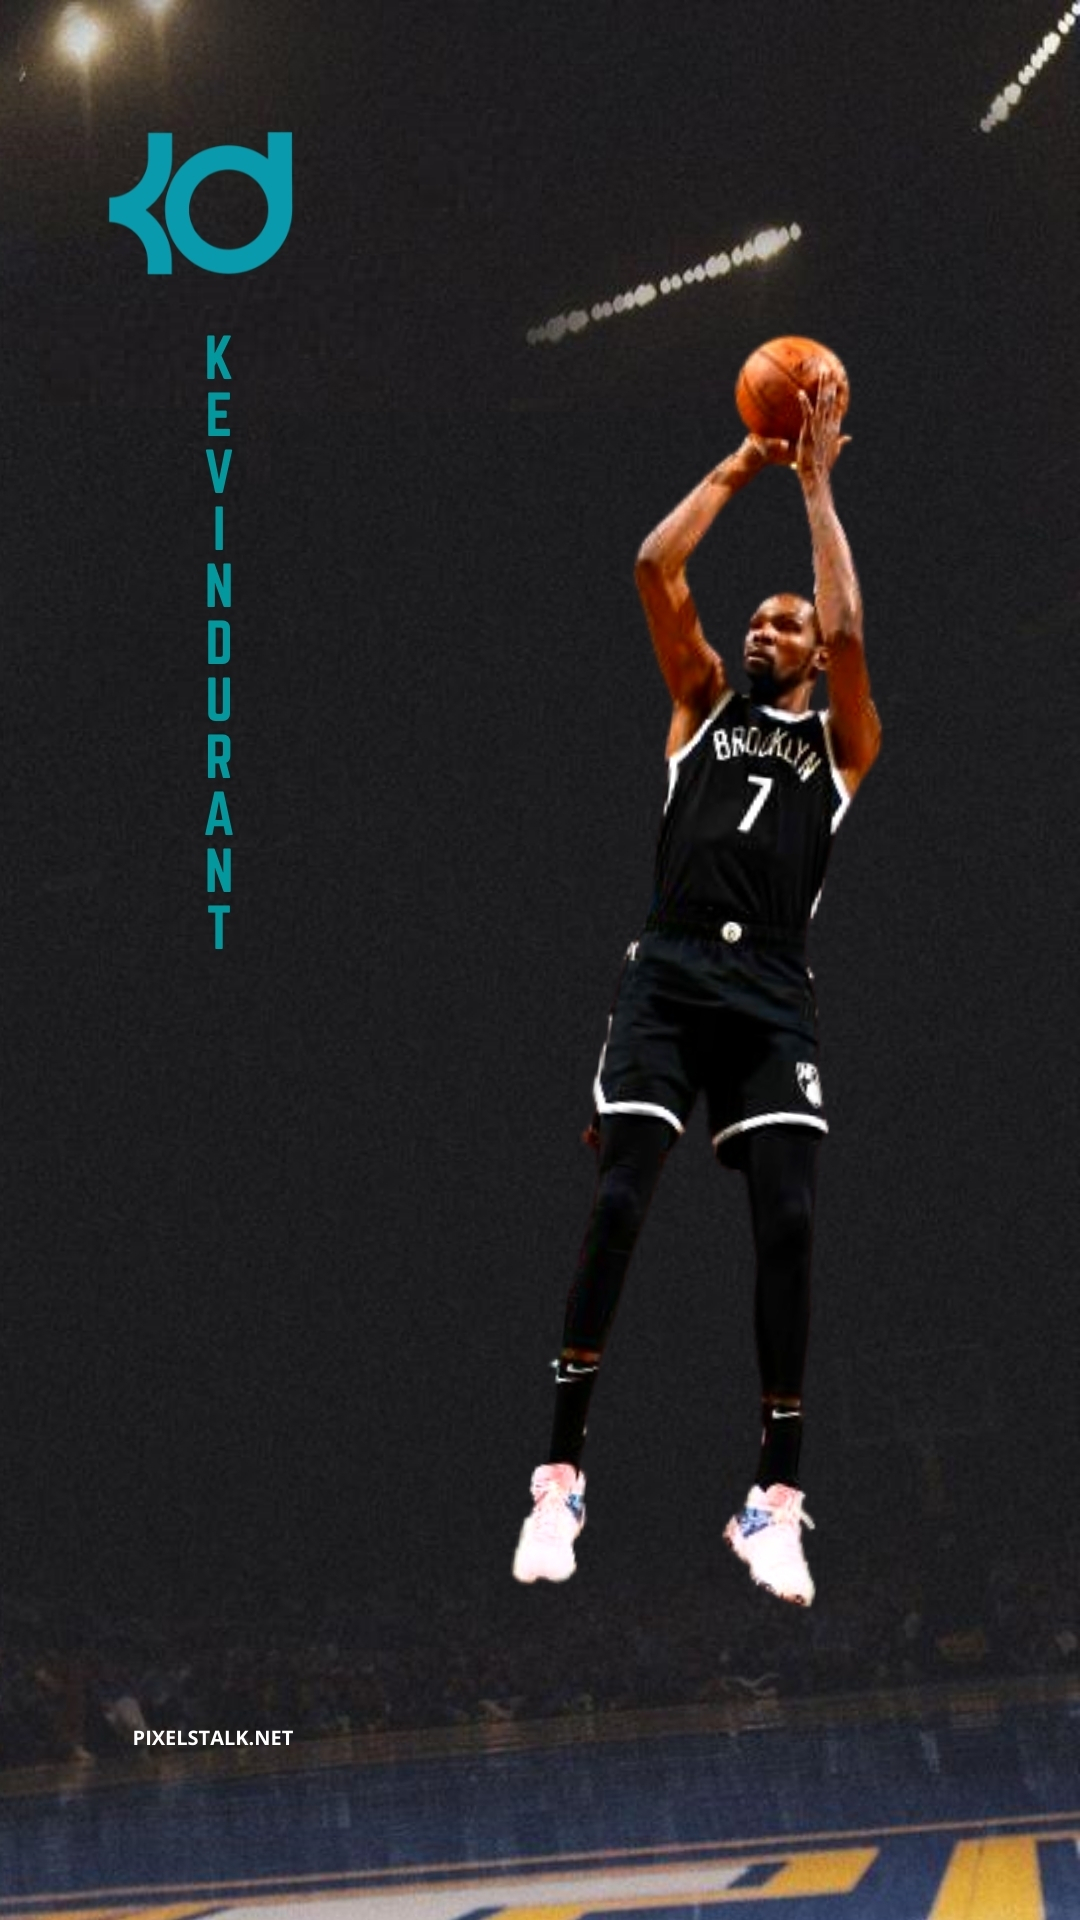 HD kevin durant wallpapers | Peakpx